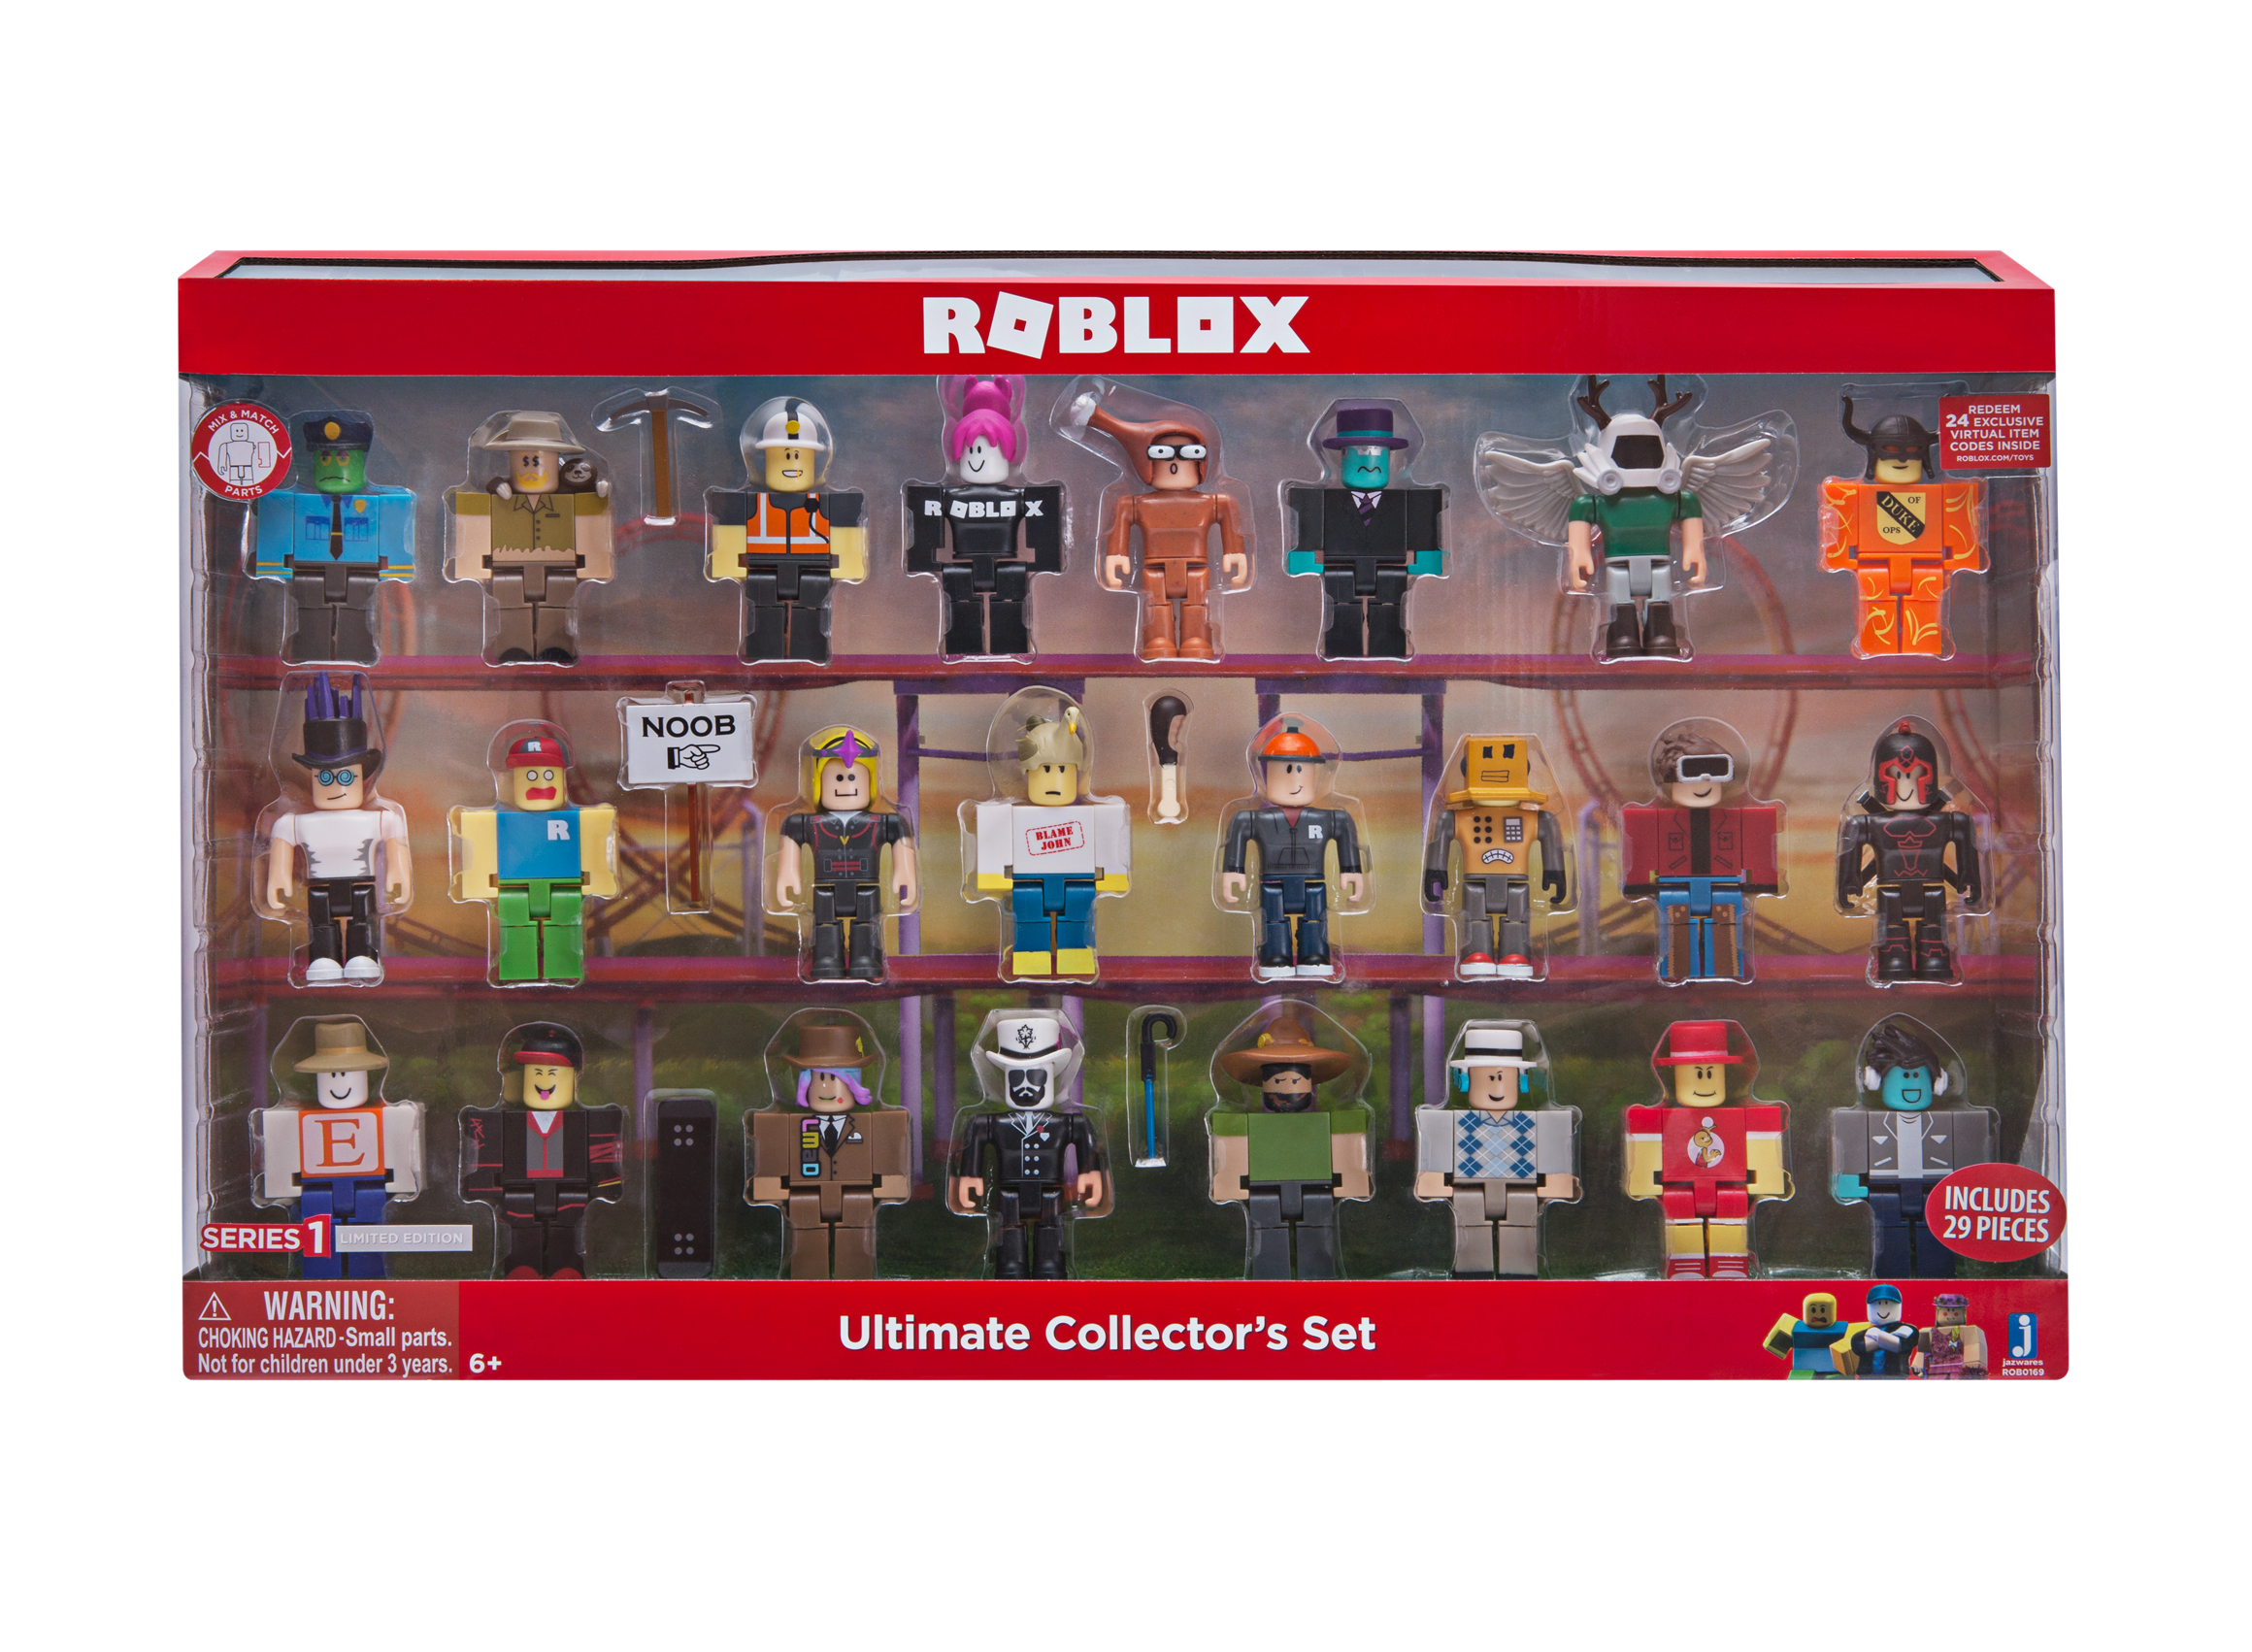 Playsets Action Toy Figures Roblox Ultimate Collectors Set Series 2 Playsets Vehicles Playsets - roblox series 2 microwave spybot action figure mystery box virtual item code 25